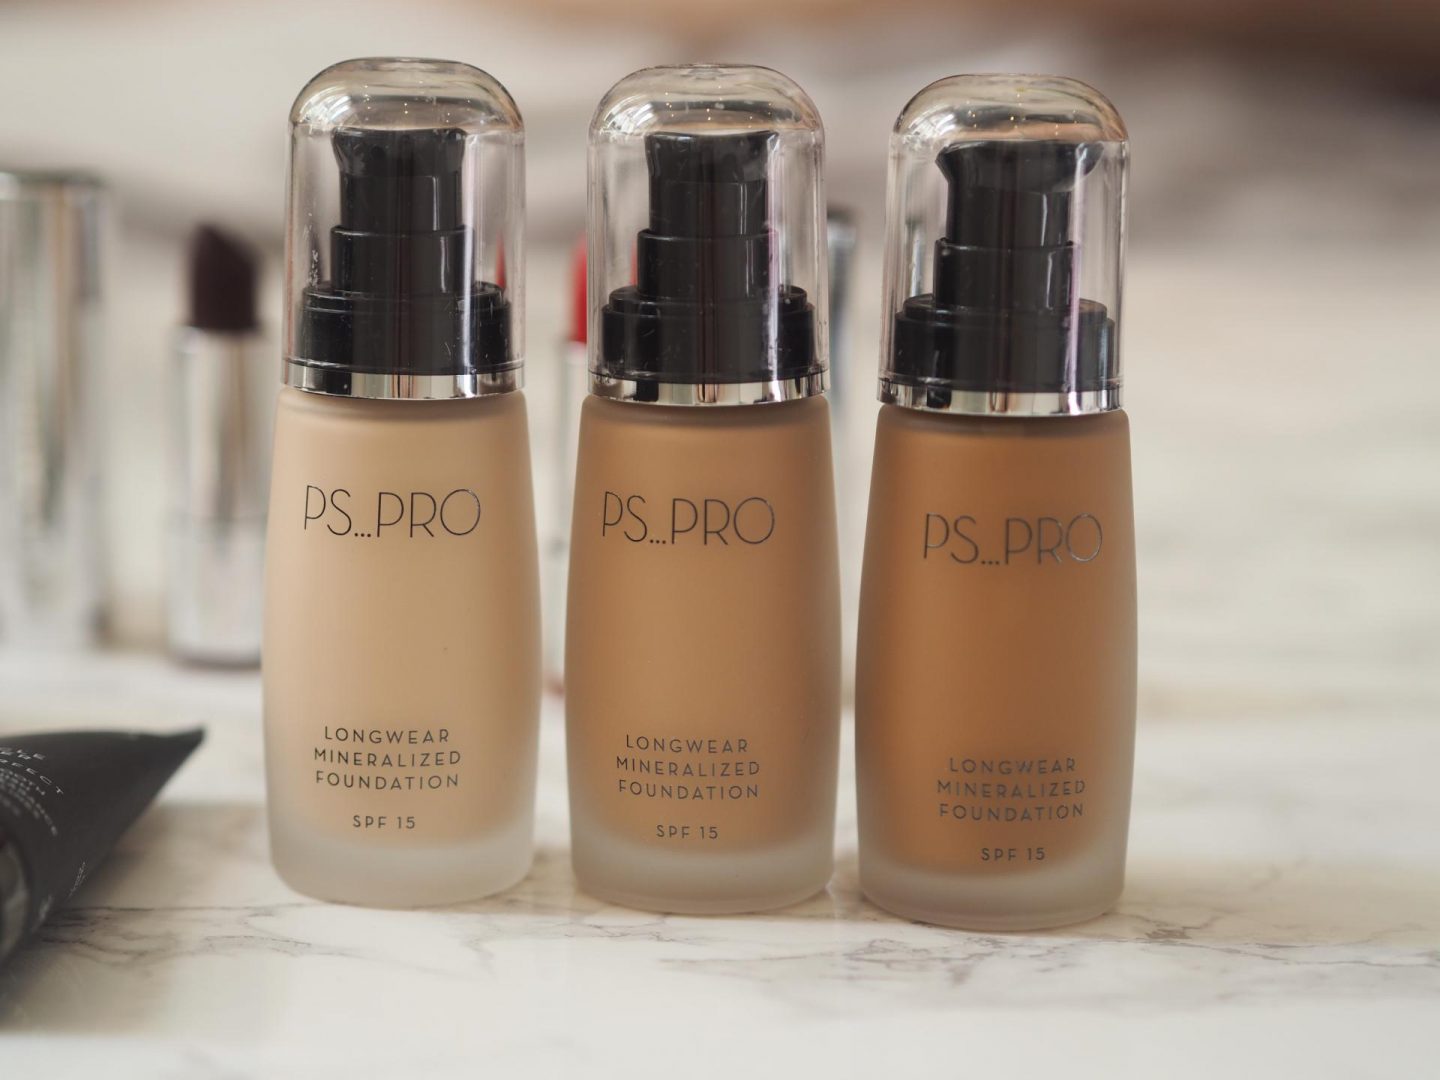 Primark PS Pro - Products: Longwear Mineralized Foundation